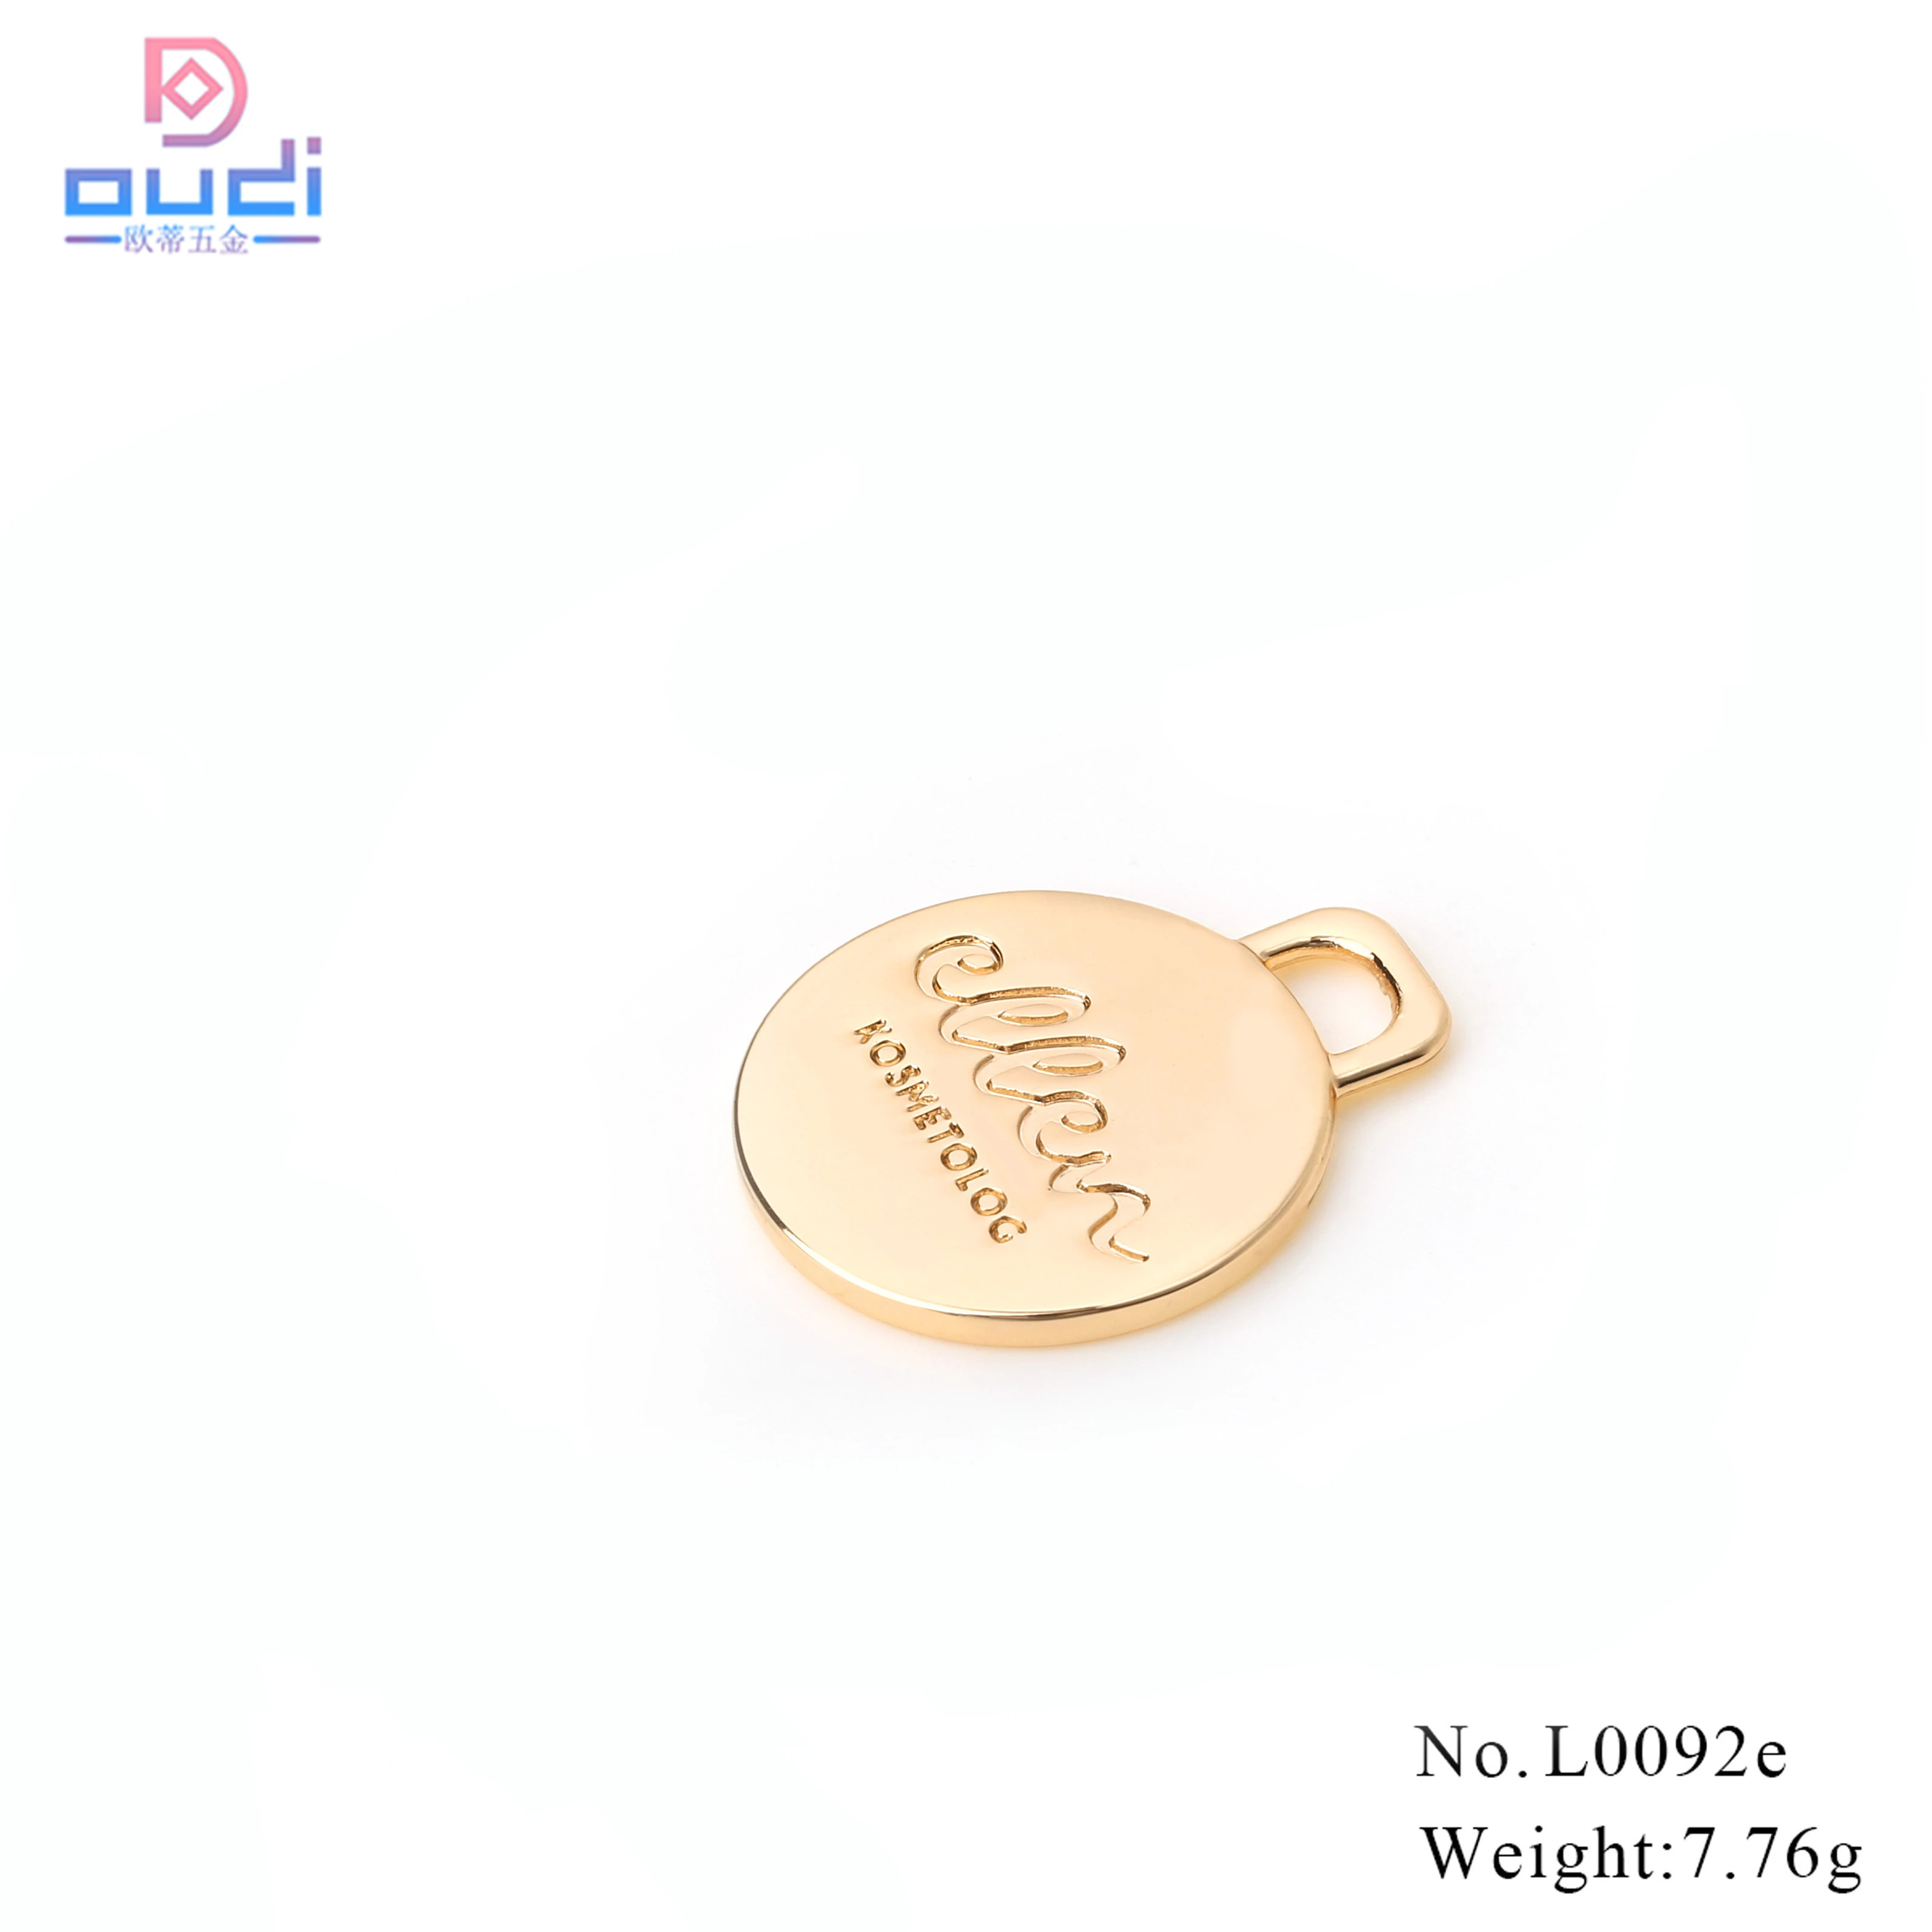 Light Gold Custom Small Bags Metal Plate Engraved Brand Name Letter Logo Label for Handbag or Garments Bag Parts and Accessories